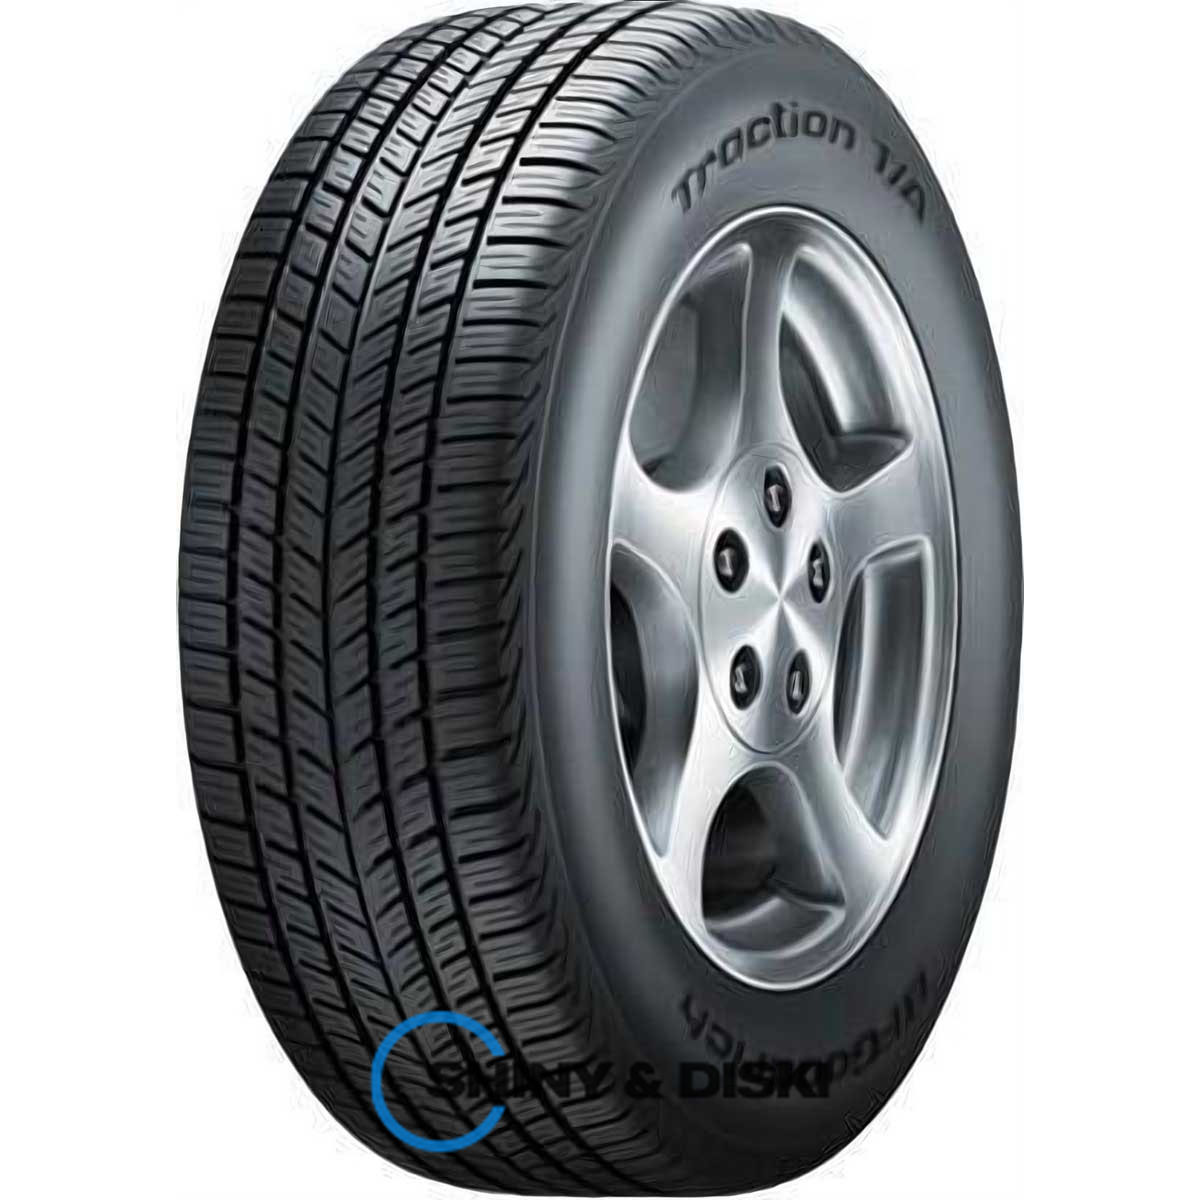 bfgoodrich traction t/a 245/55 r18 102t